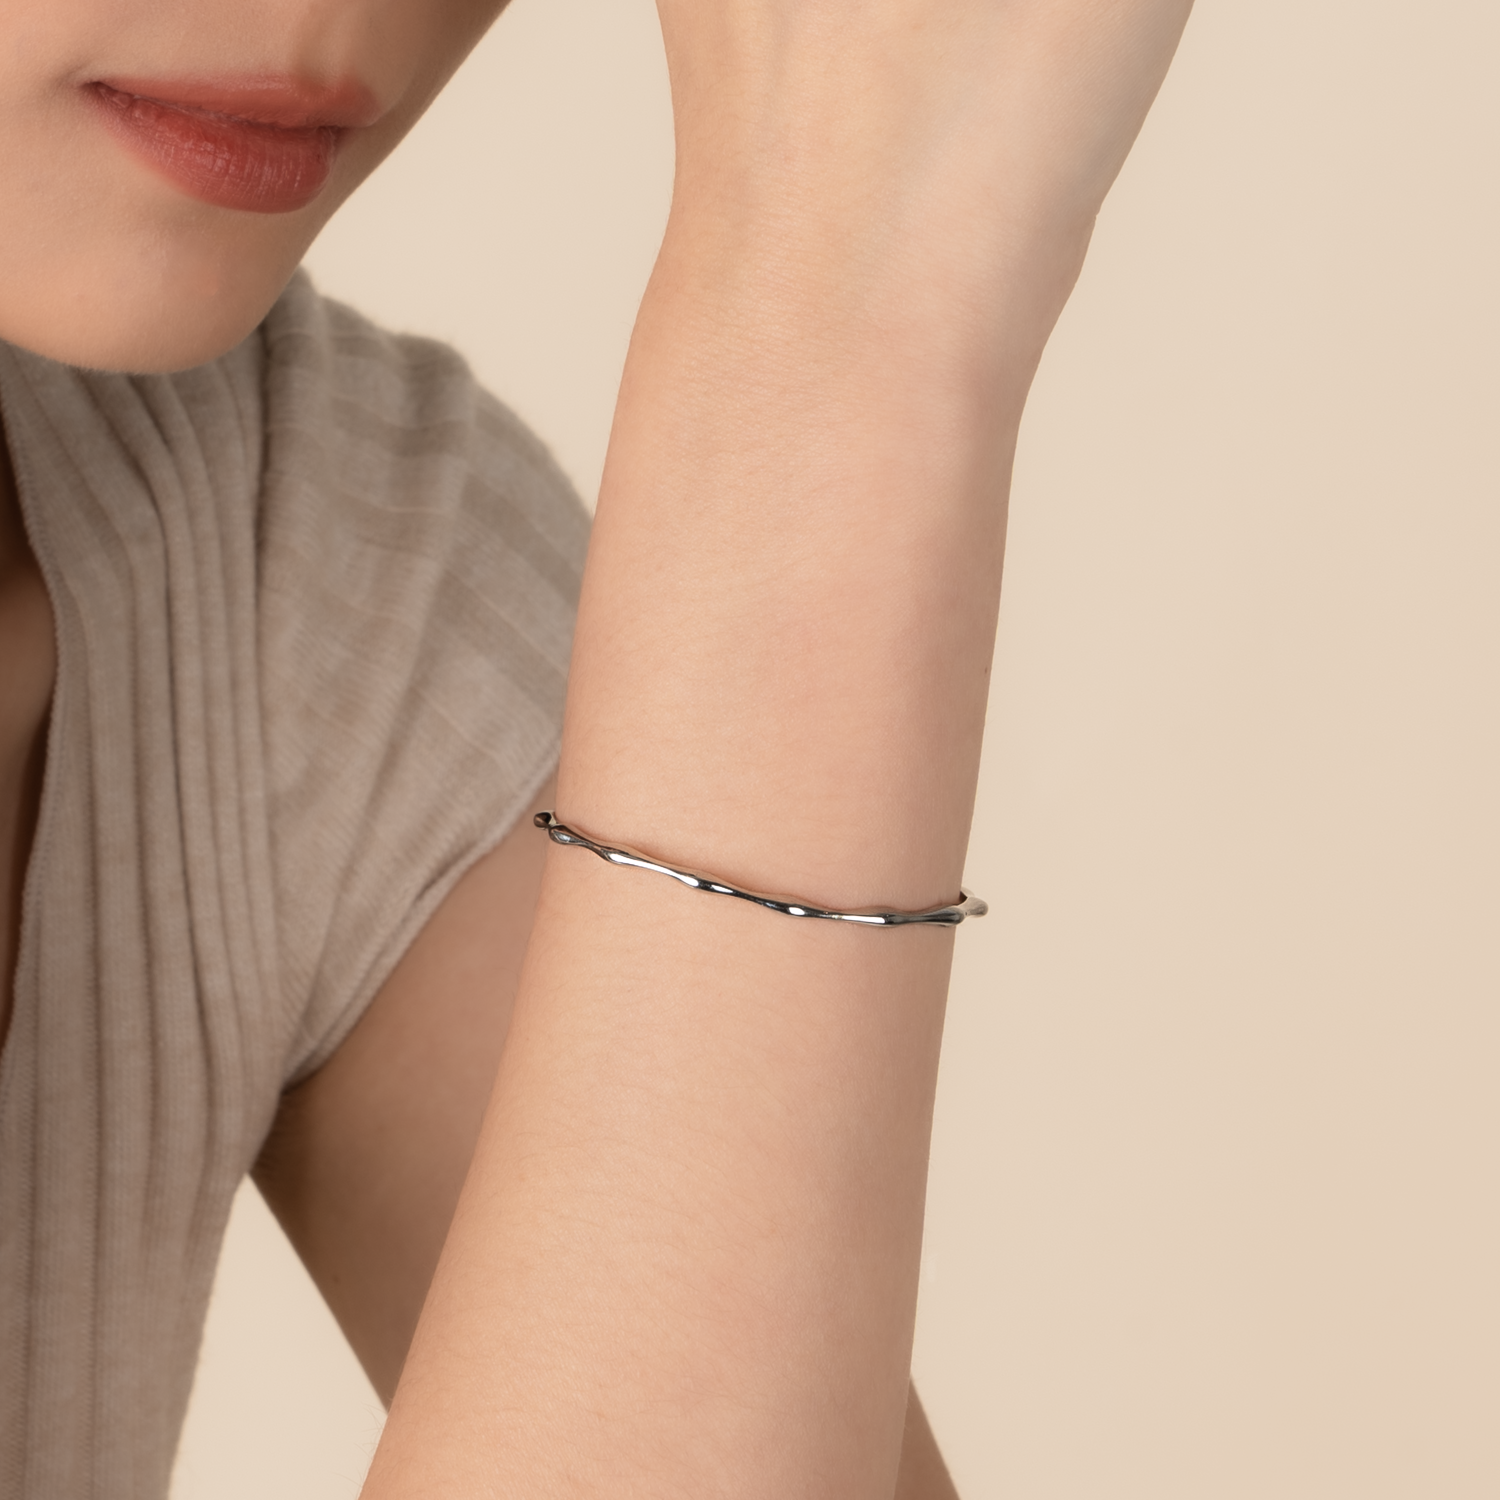 Model is wearing minimalist and chic bangle in 925 silver.